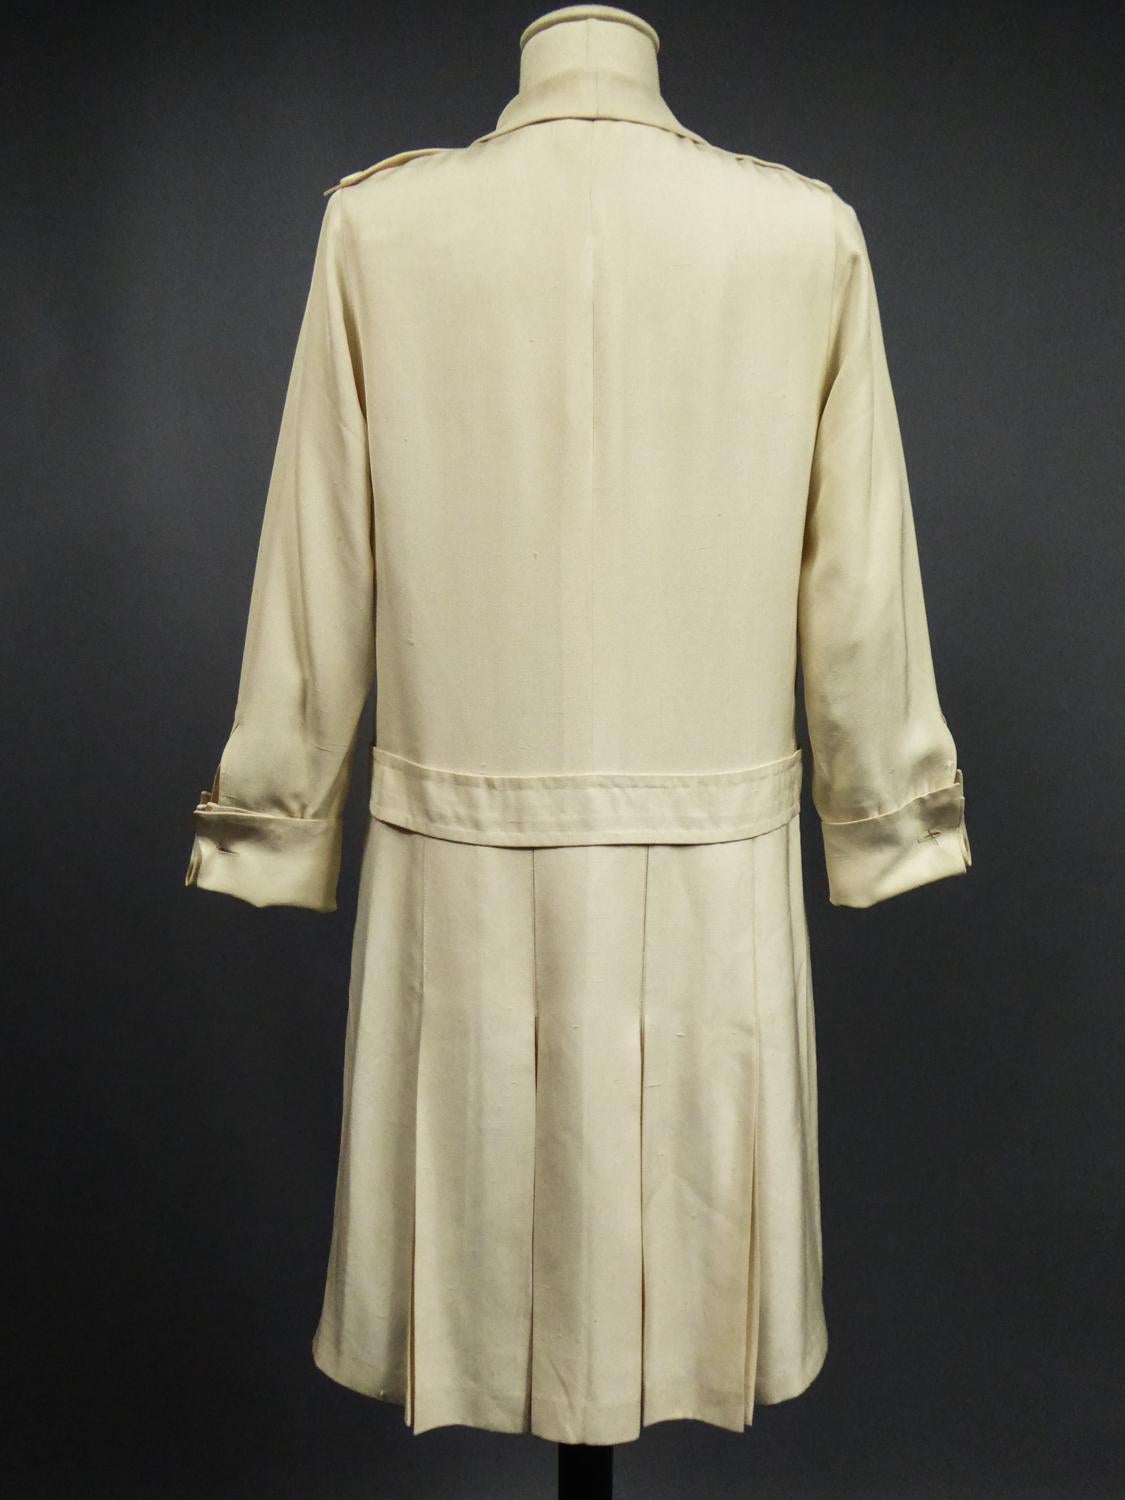 An Yves Saint Laurent Cocktail Dress Numbered 15193 - 1965 Collection 11